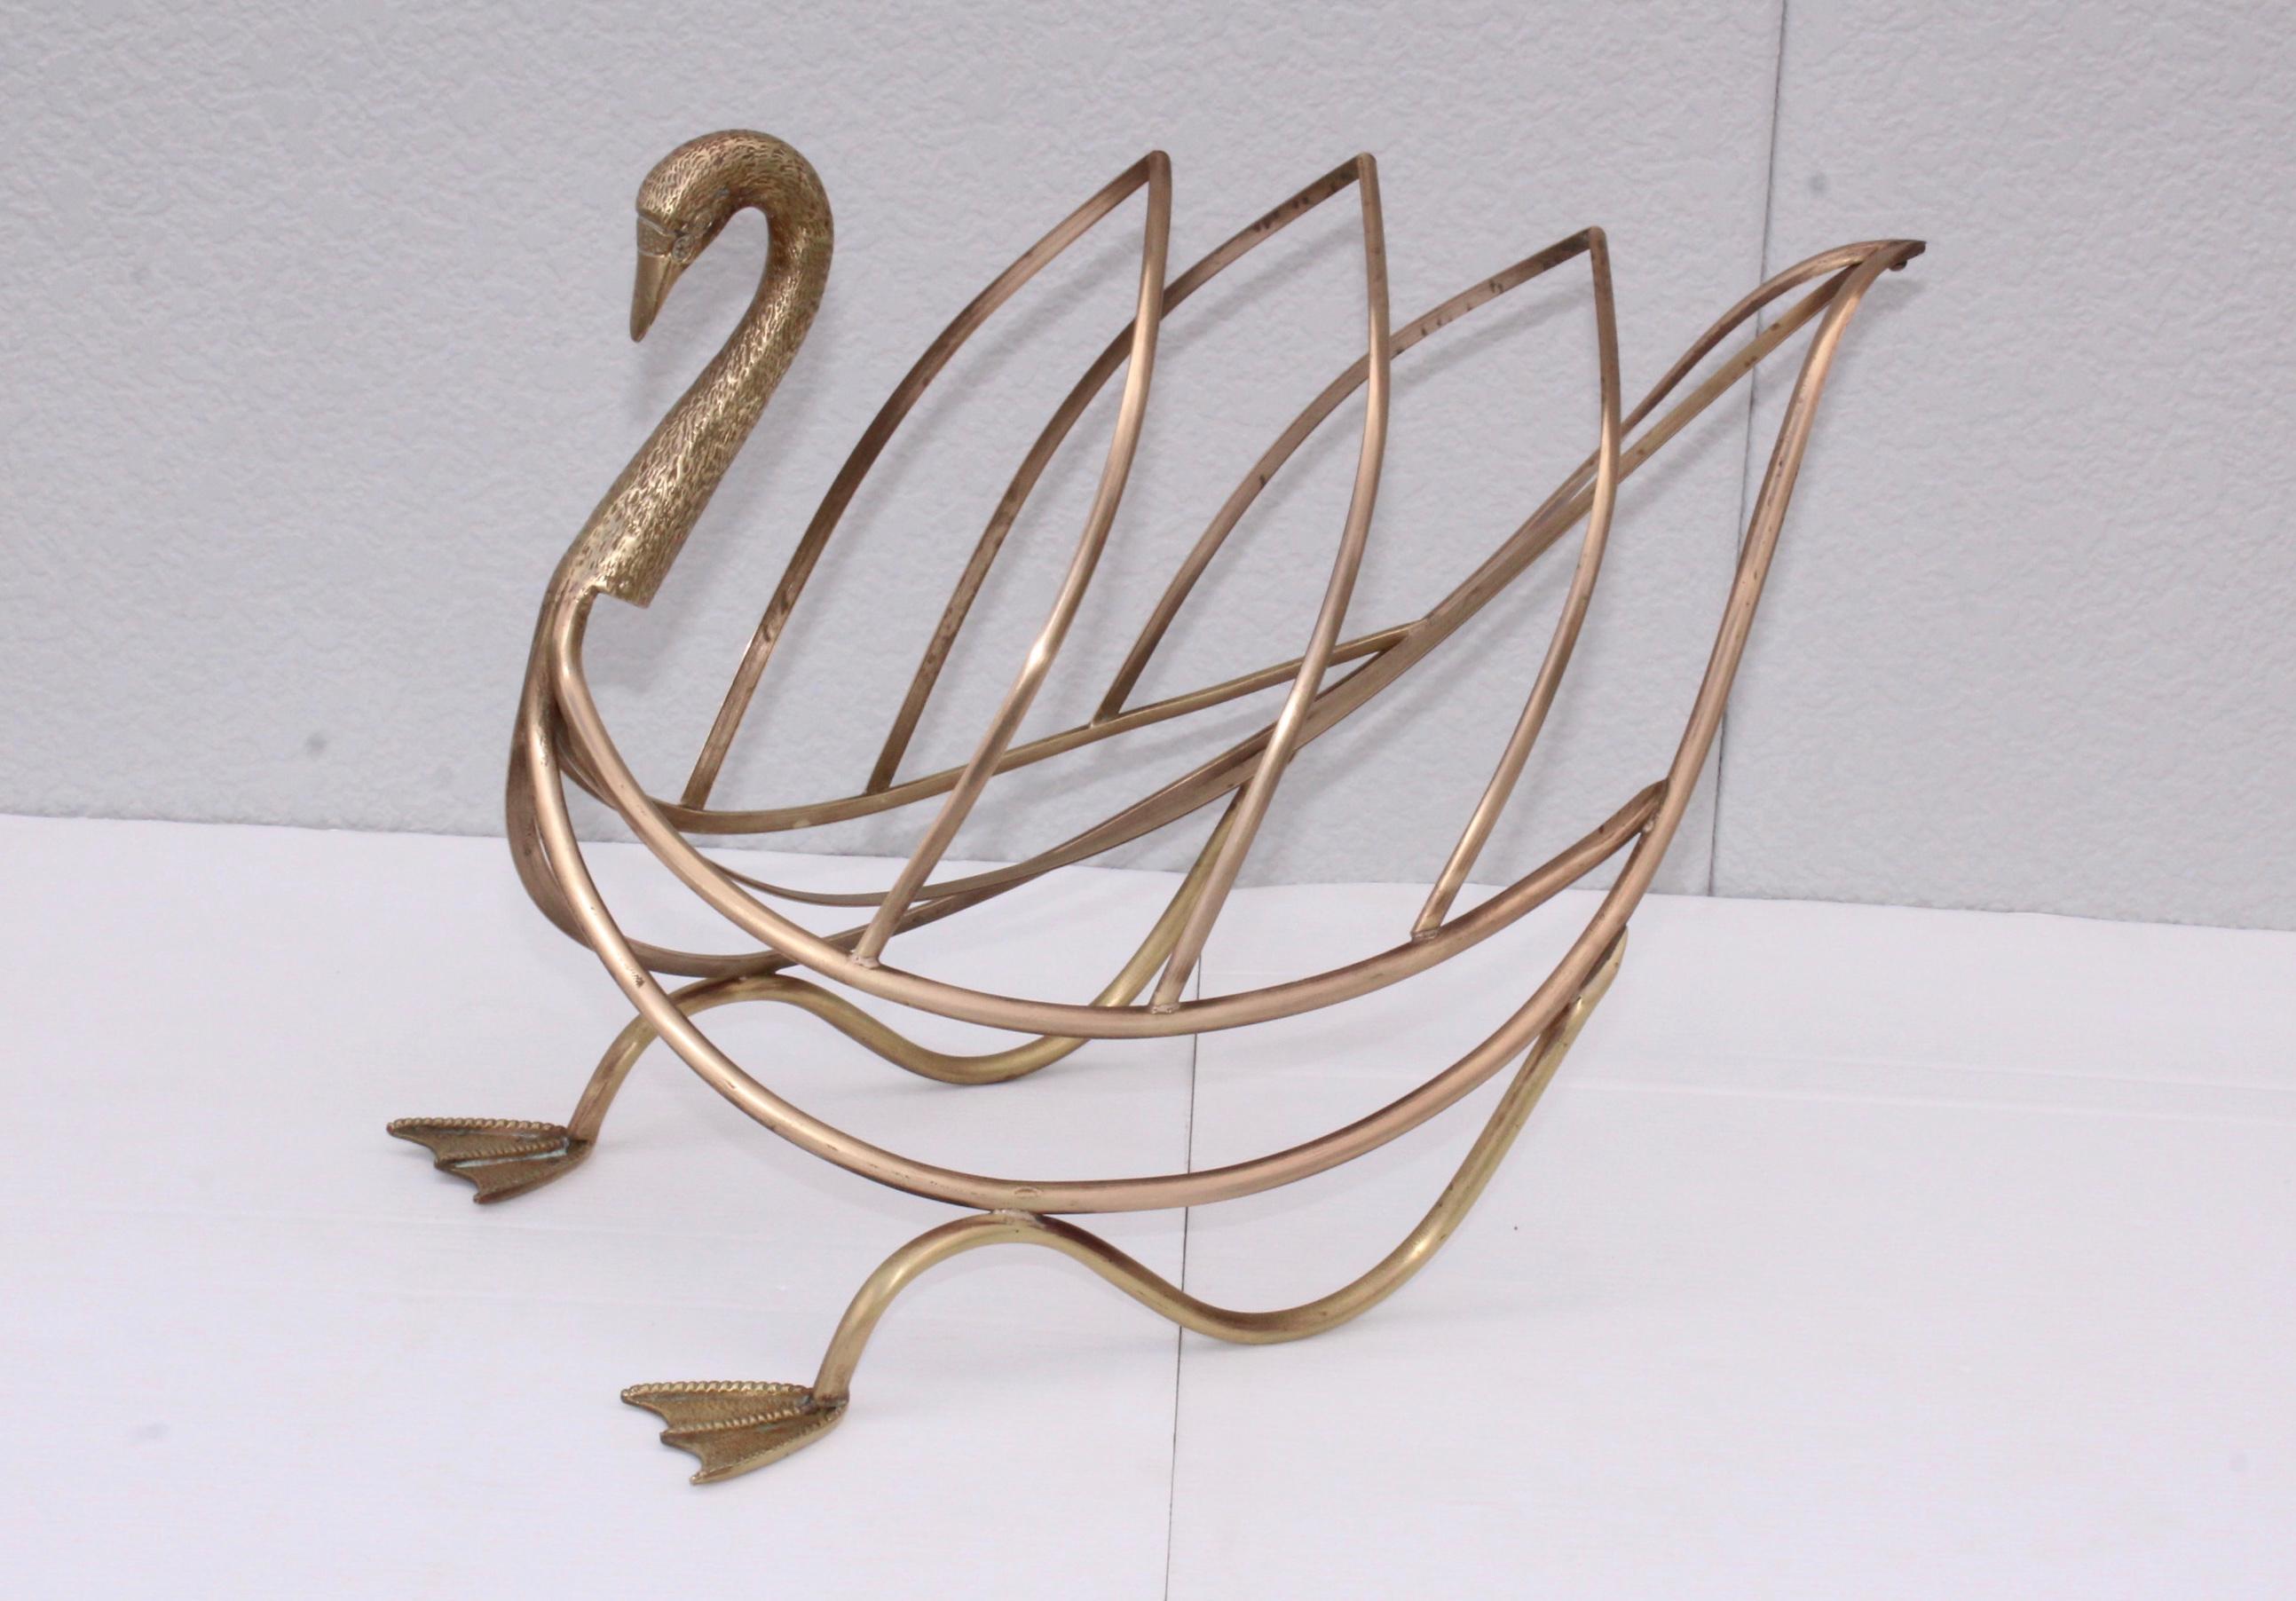 1960s solid brass swan magazine holder by Maison Jansen, in vintage condition lightly hand polished.